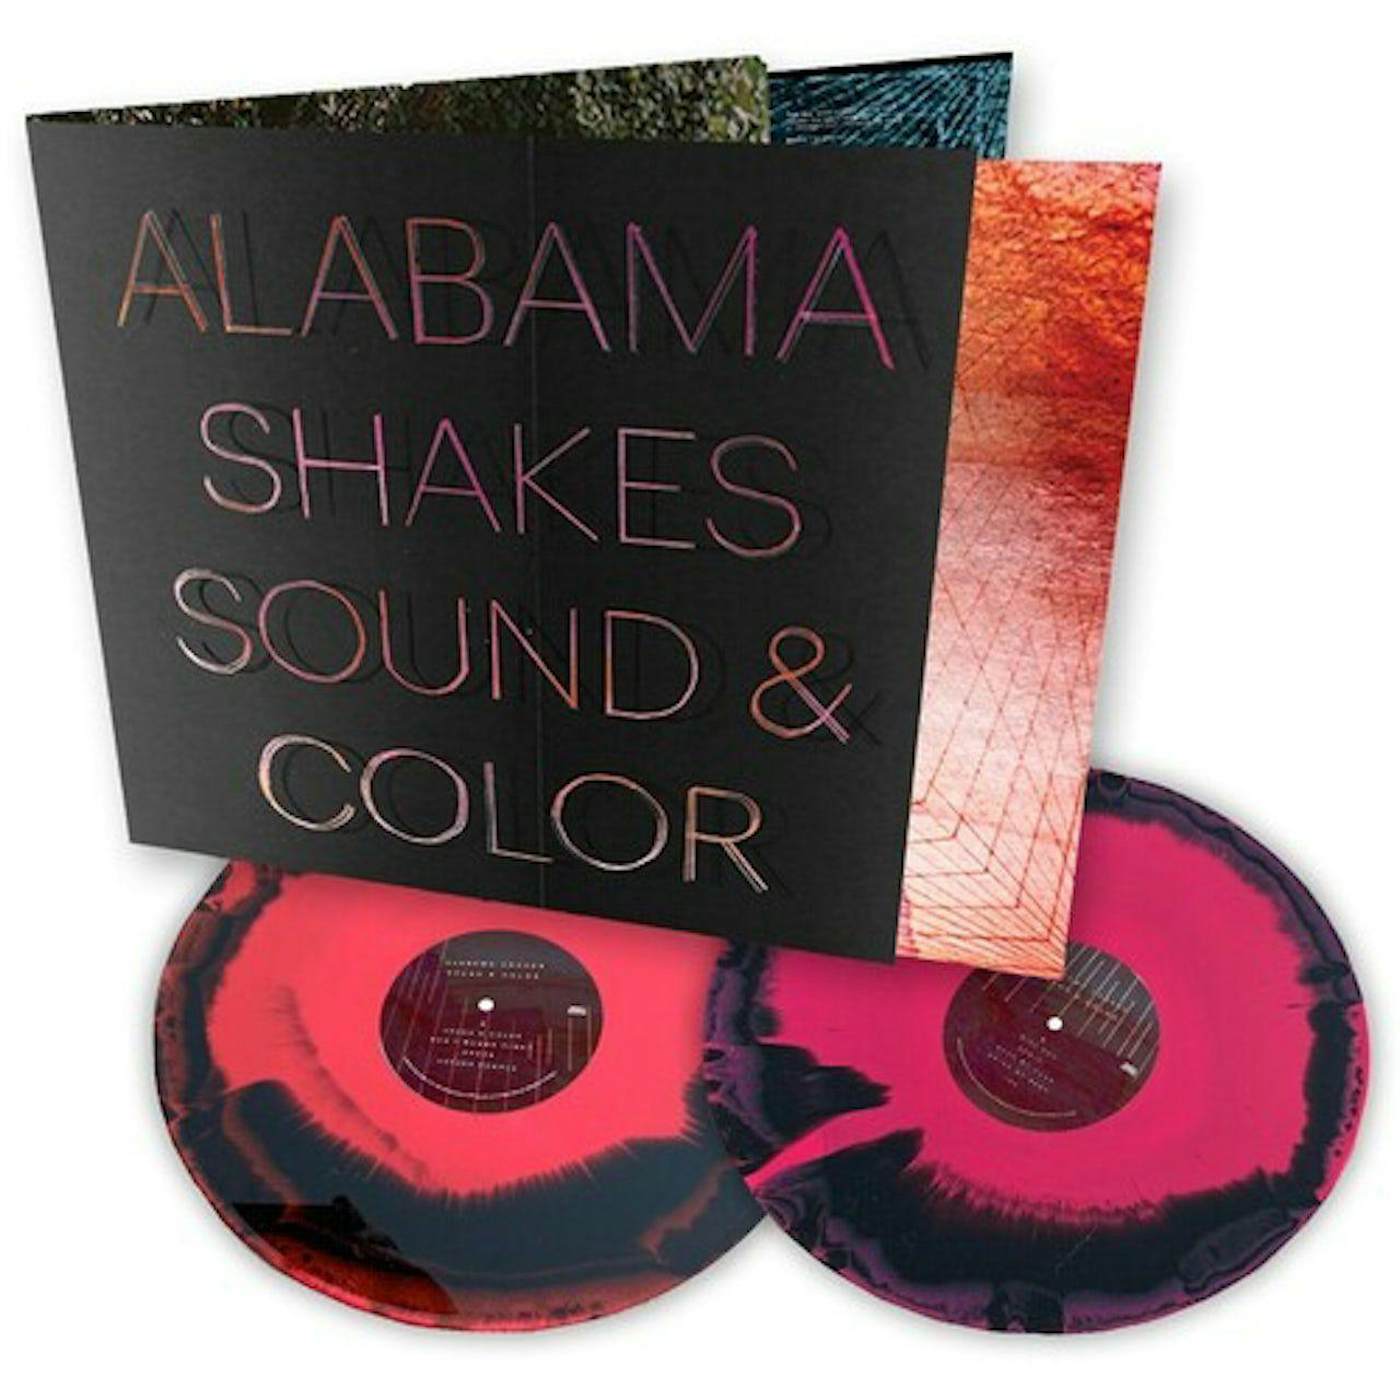 Alabama Shakes Sound & Color (Deluxe/2LP/Red/Black/Pink Mixed Vinyl Record)